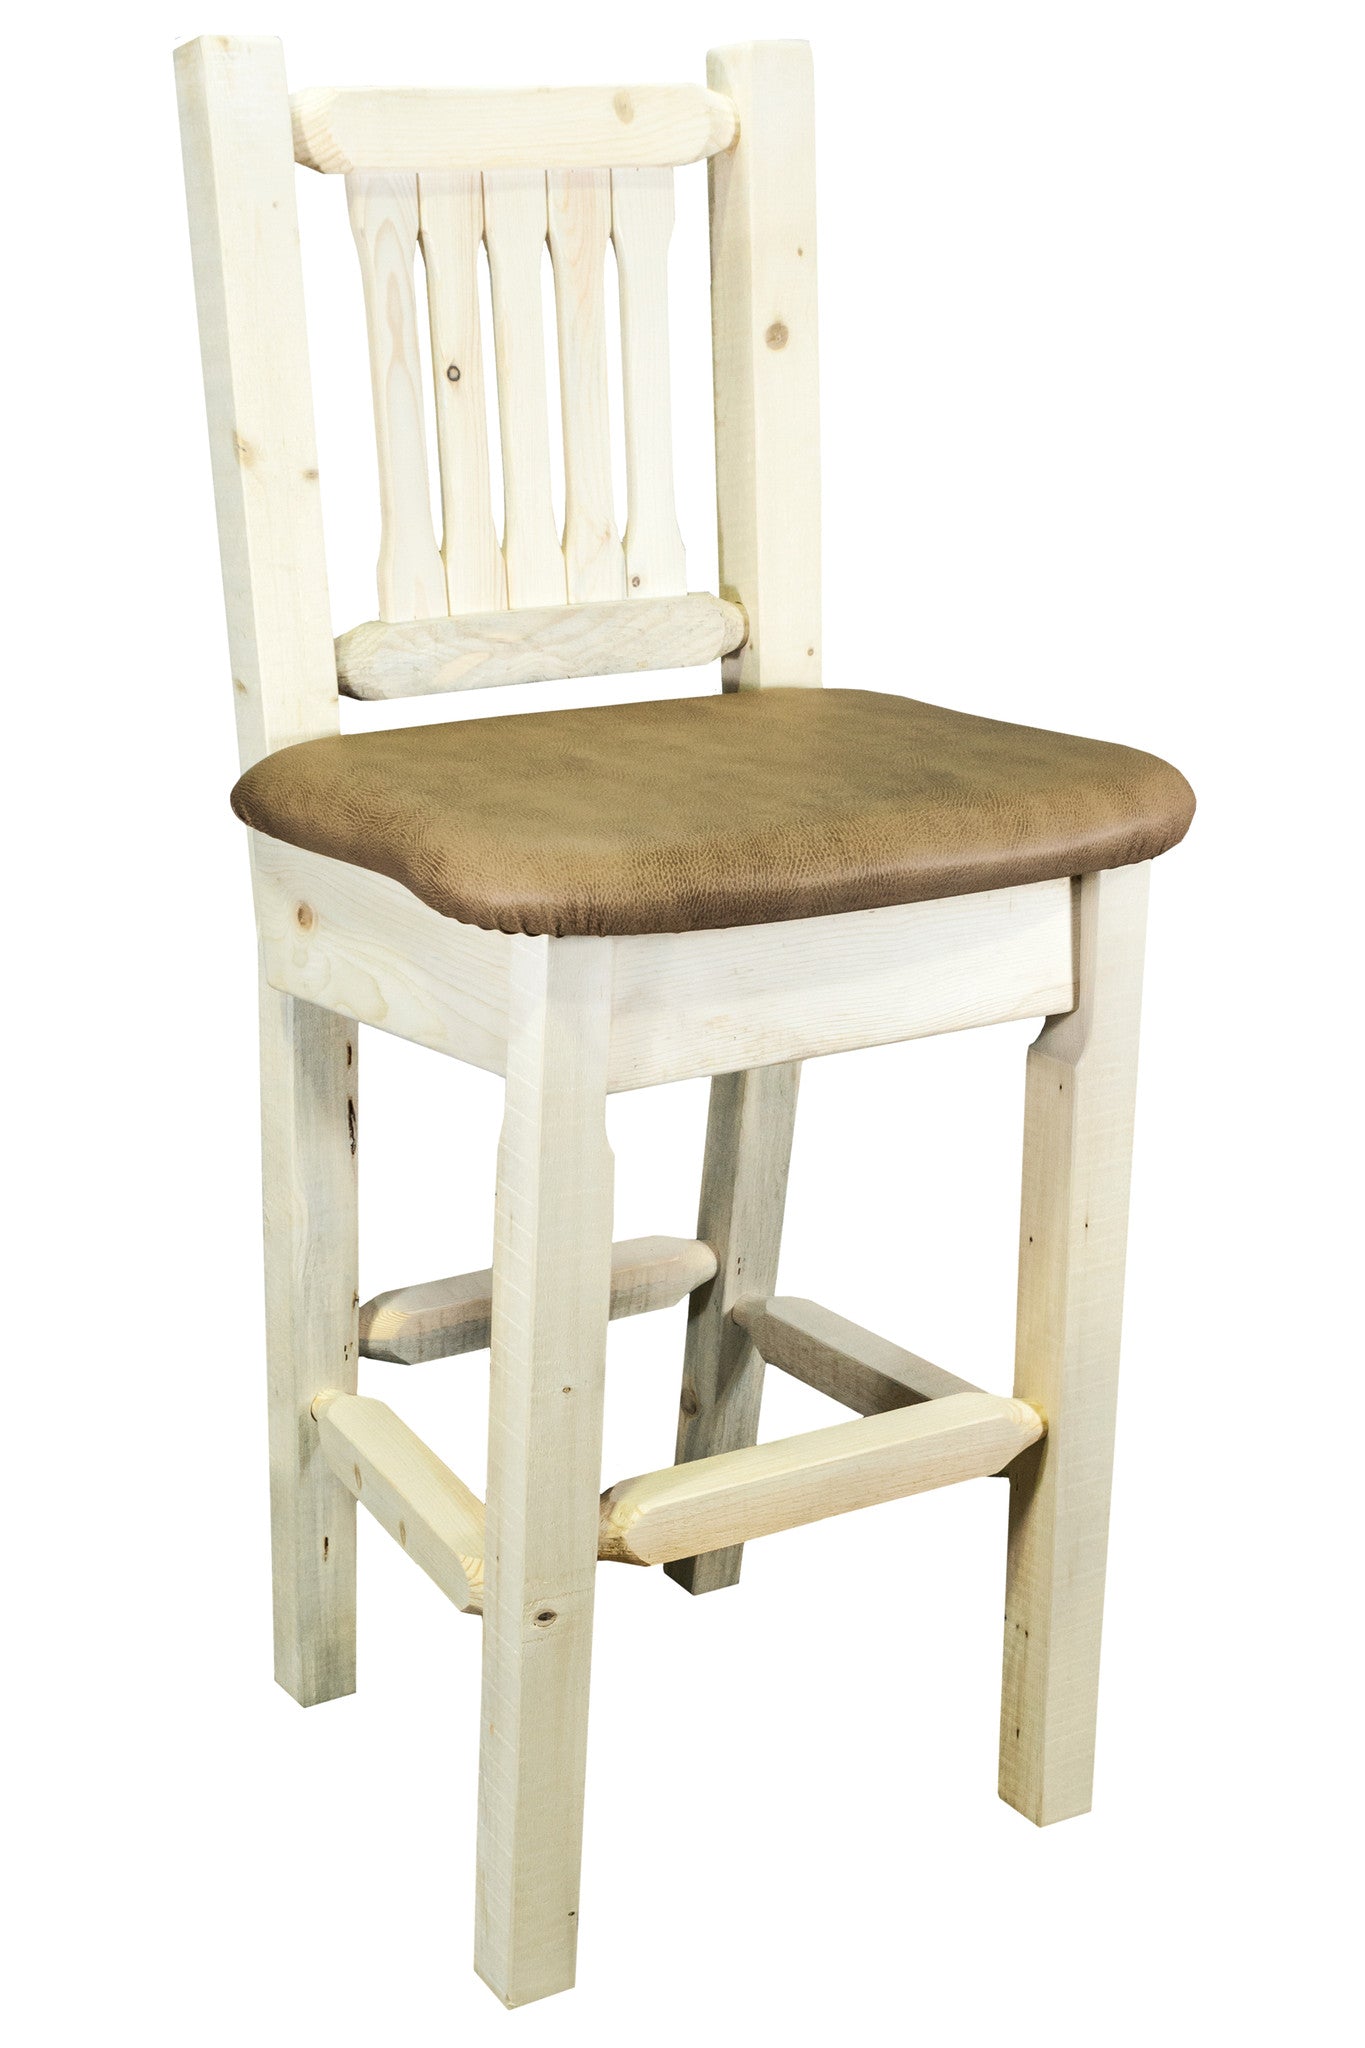 Montana Woodworks Homestead Collection Wood Barstool w/ Back w/ Upholstered Seat, Buckskin Pattern